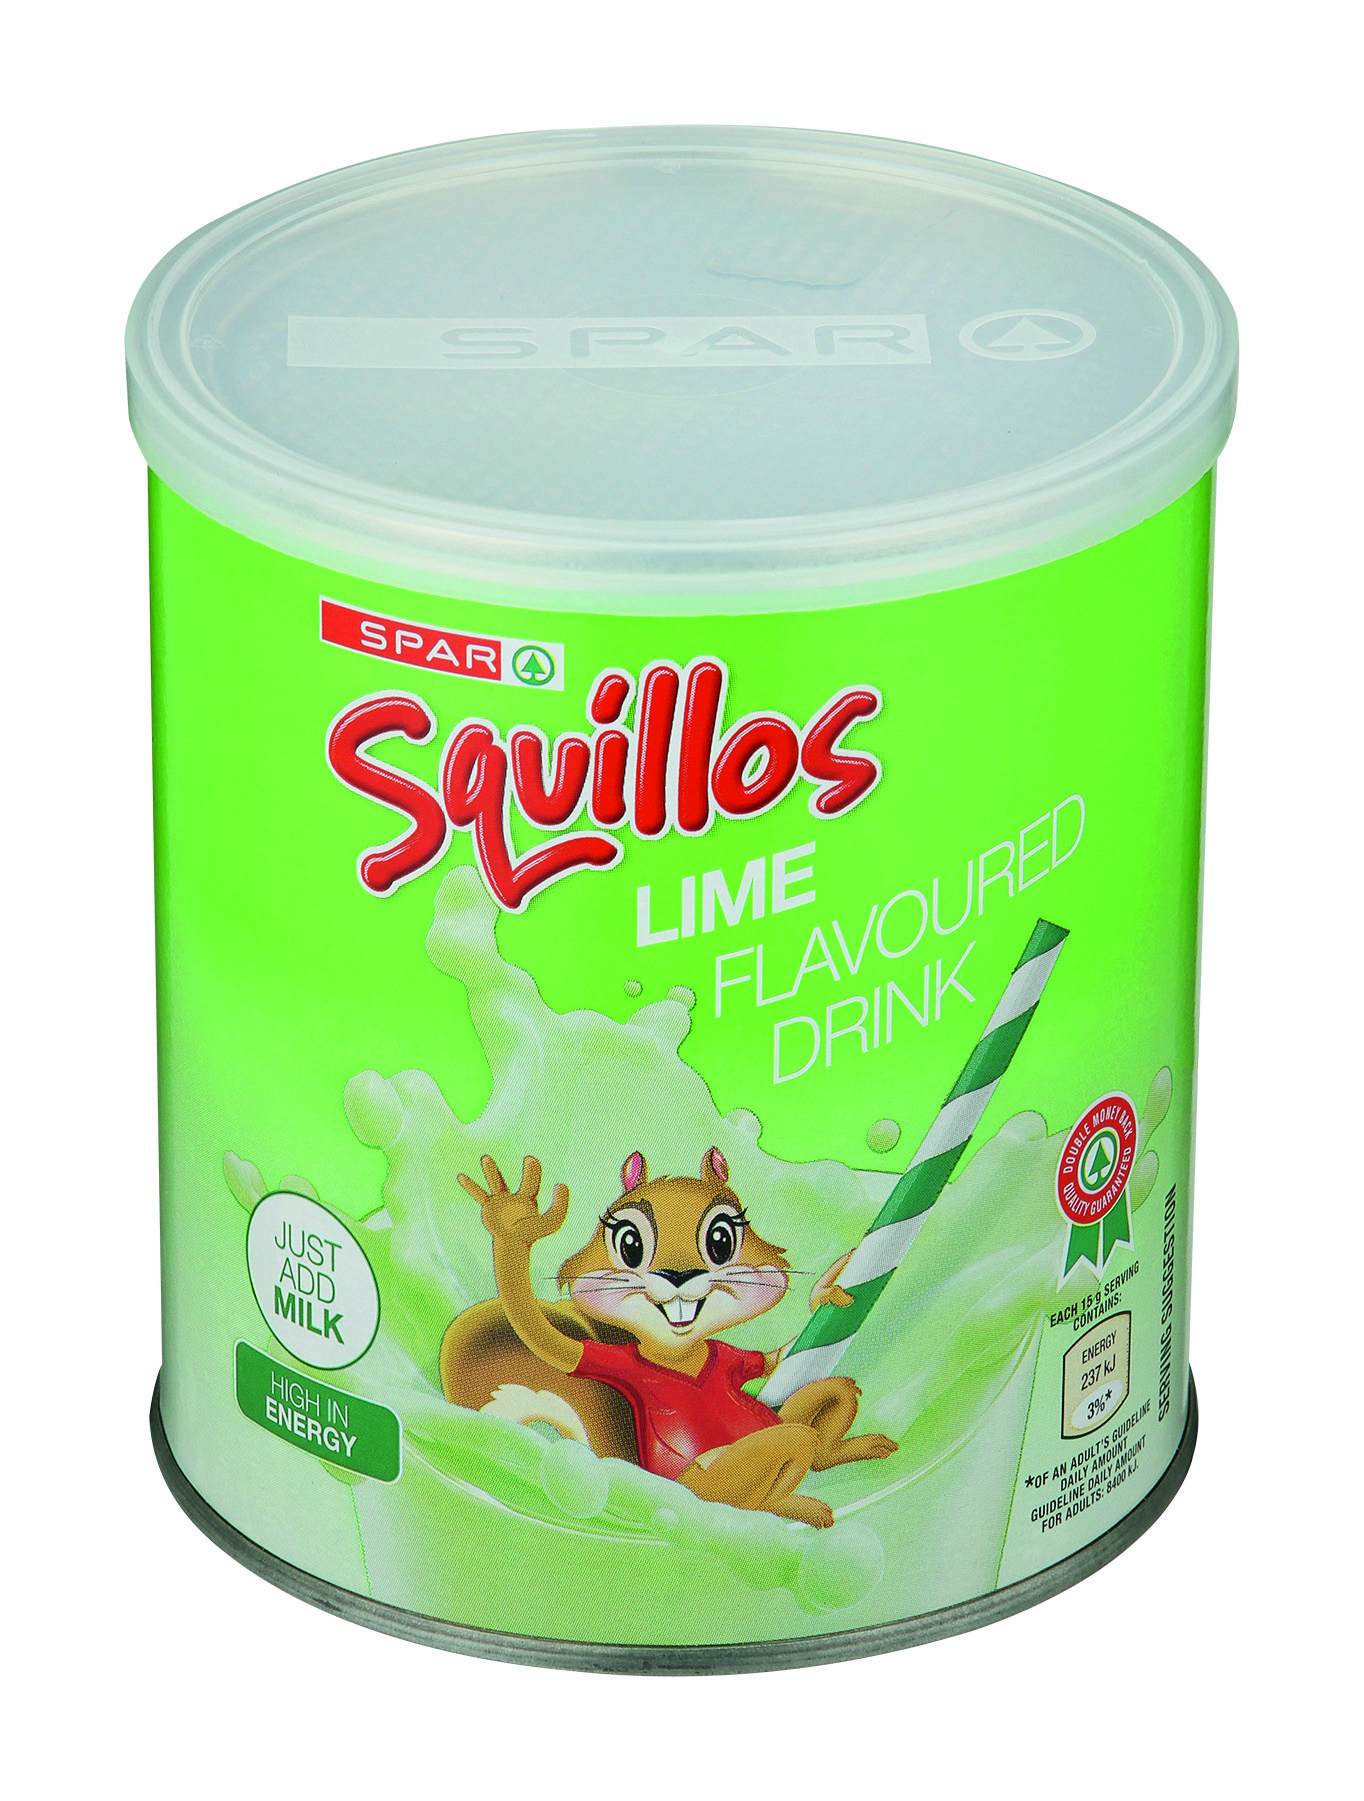 squillos milk modifier lime